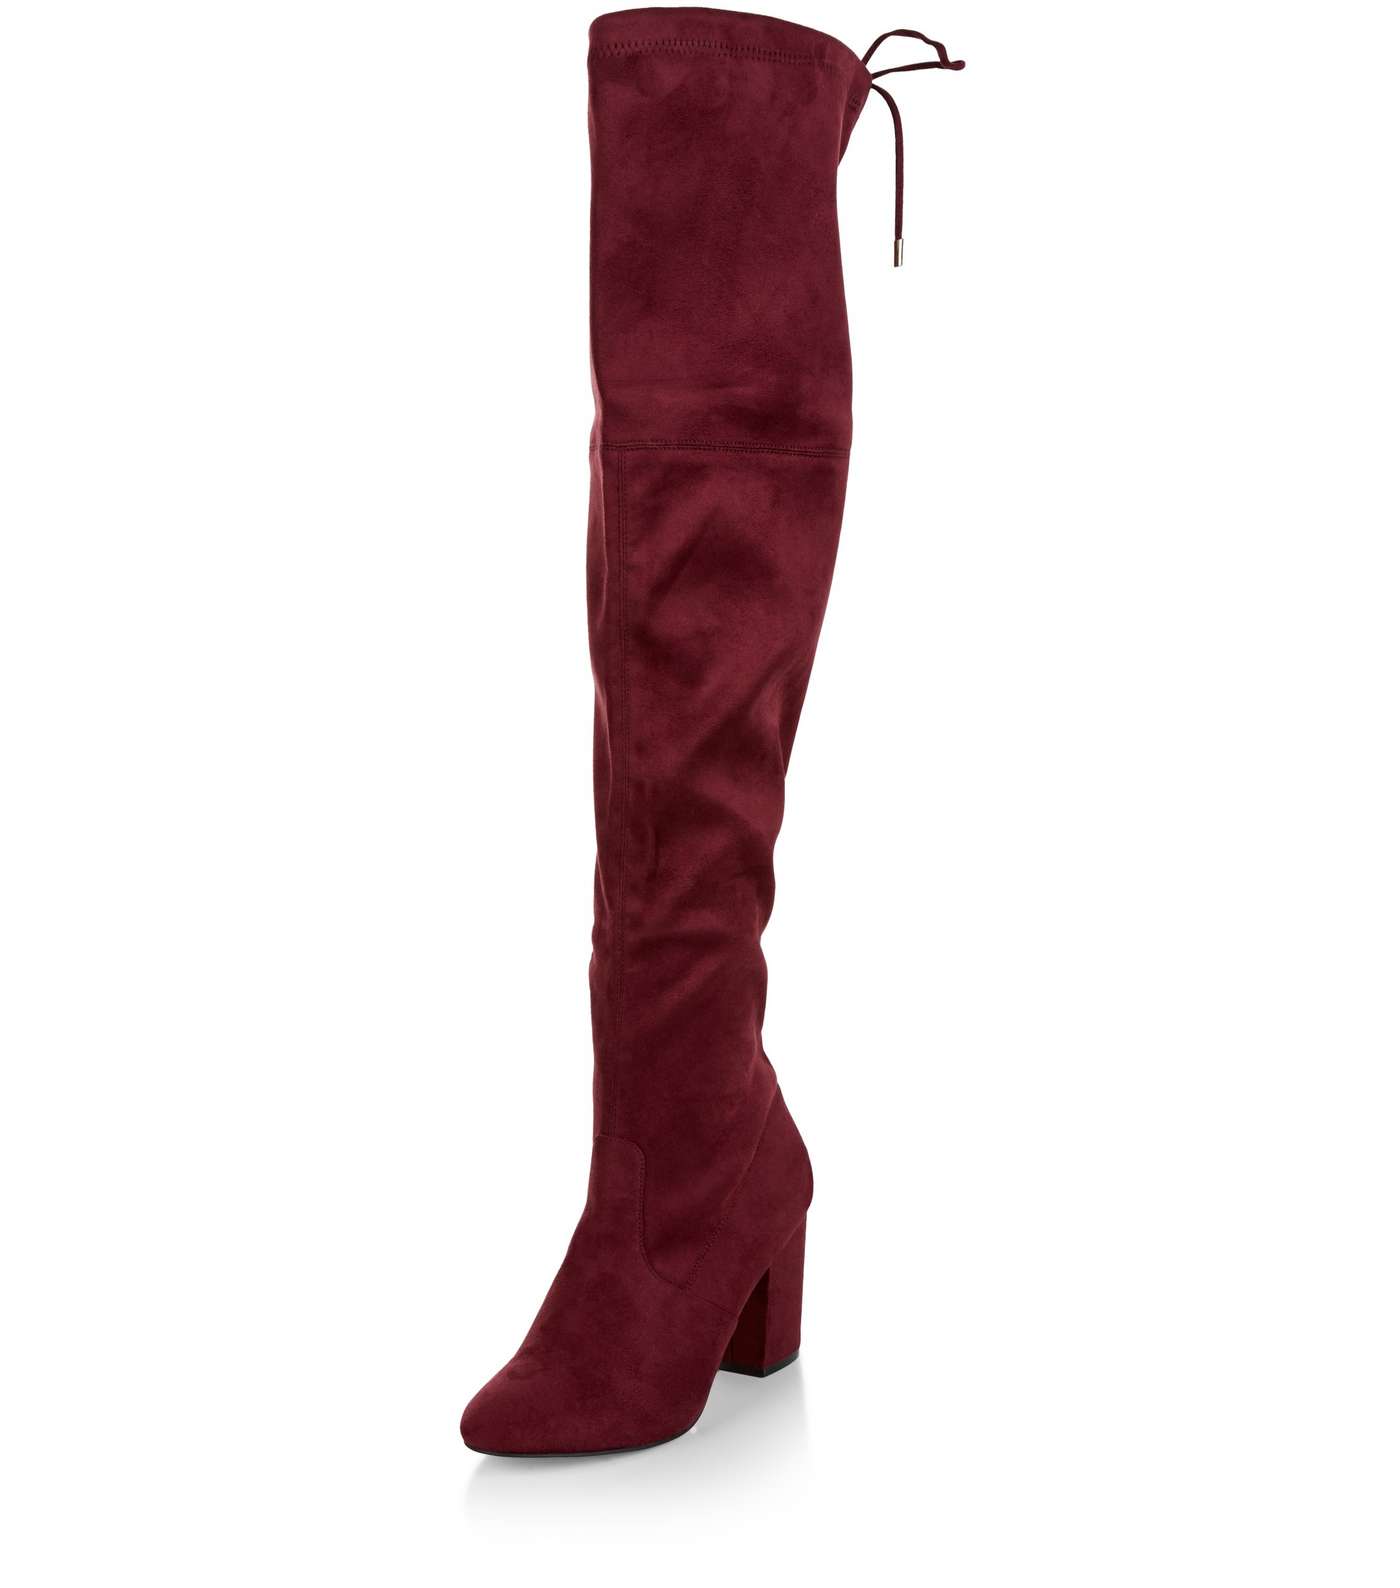 Red Suedette Tie Back Over The Knee Boots  Image 5